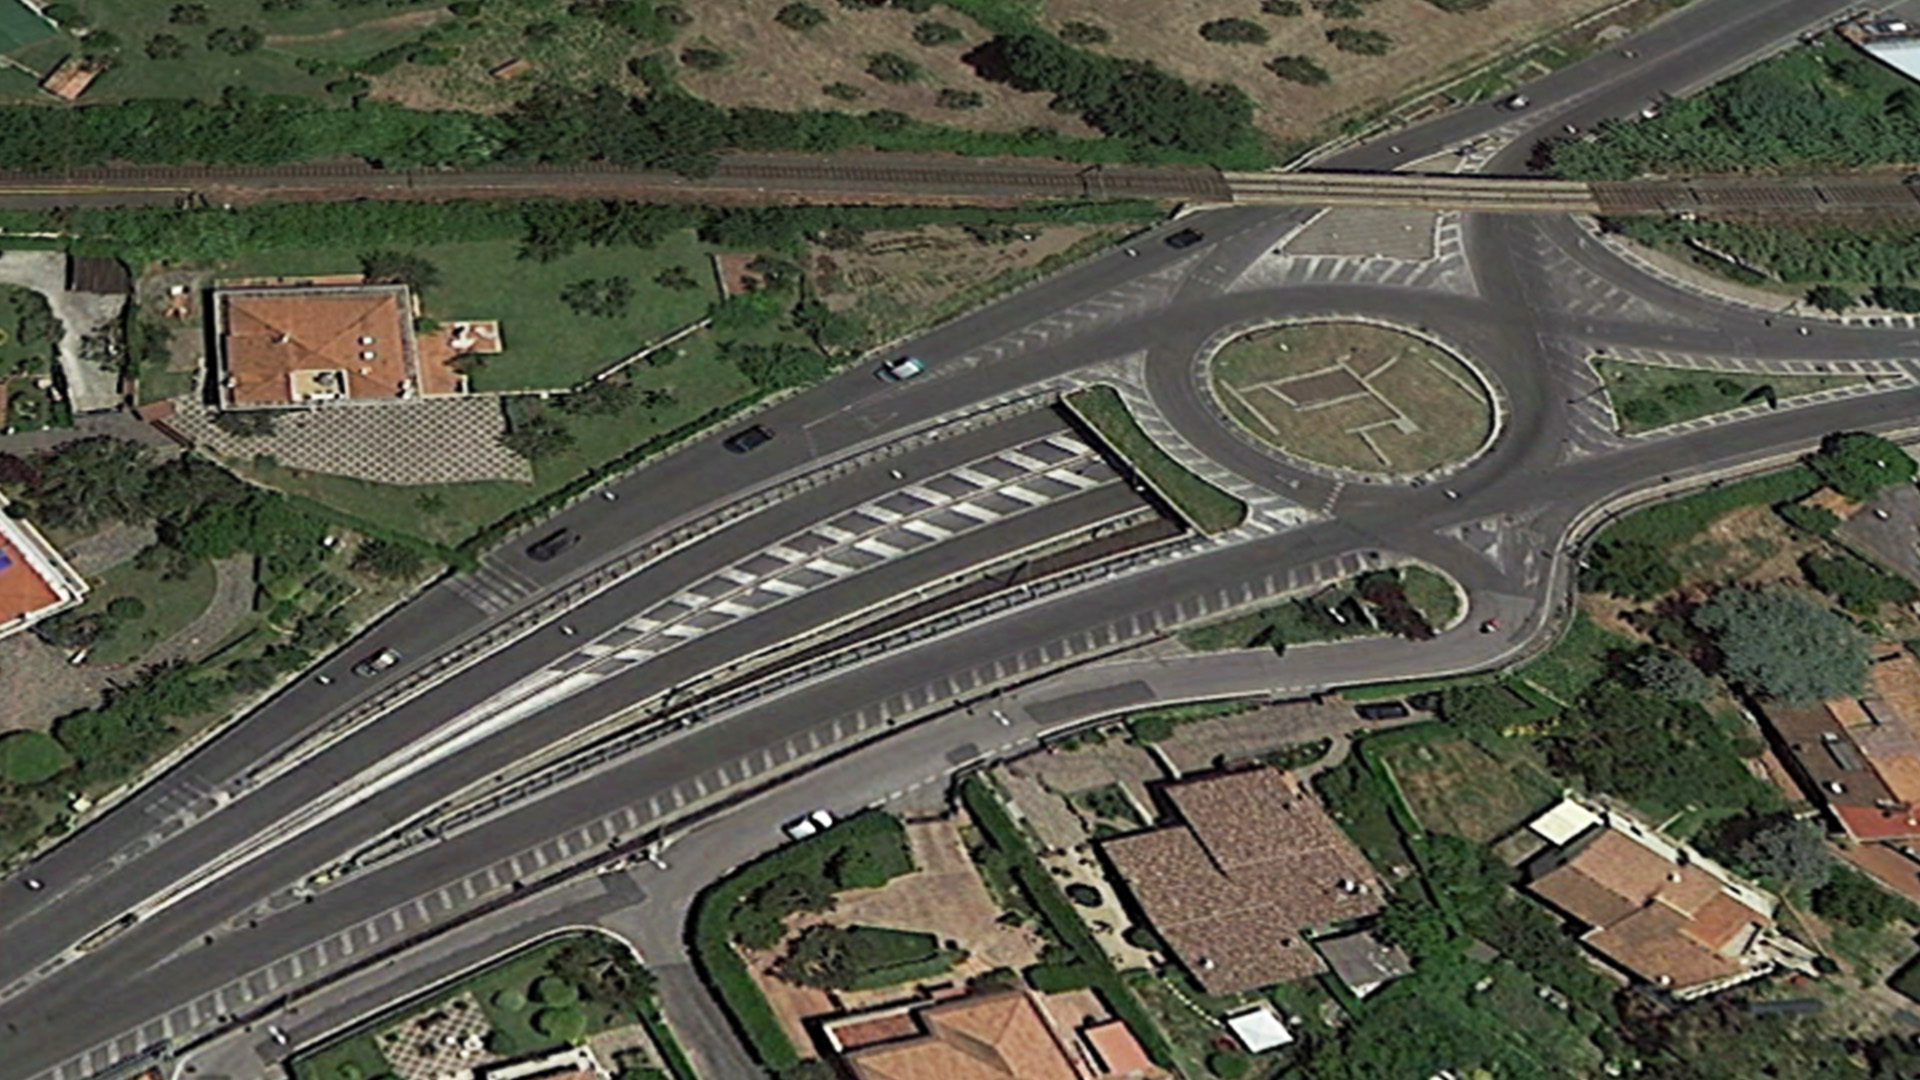 Castelli Romani Bypass To National Road S.S. 7 Appia